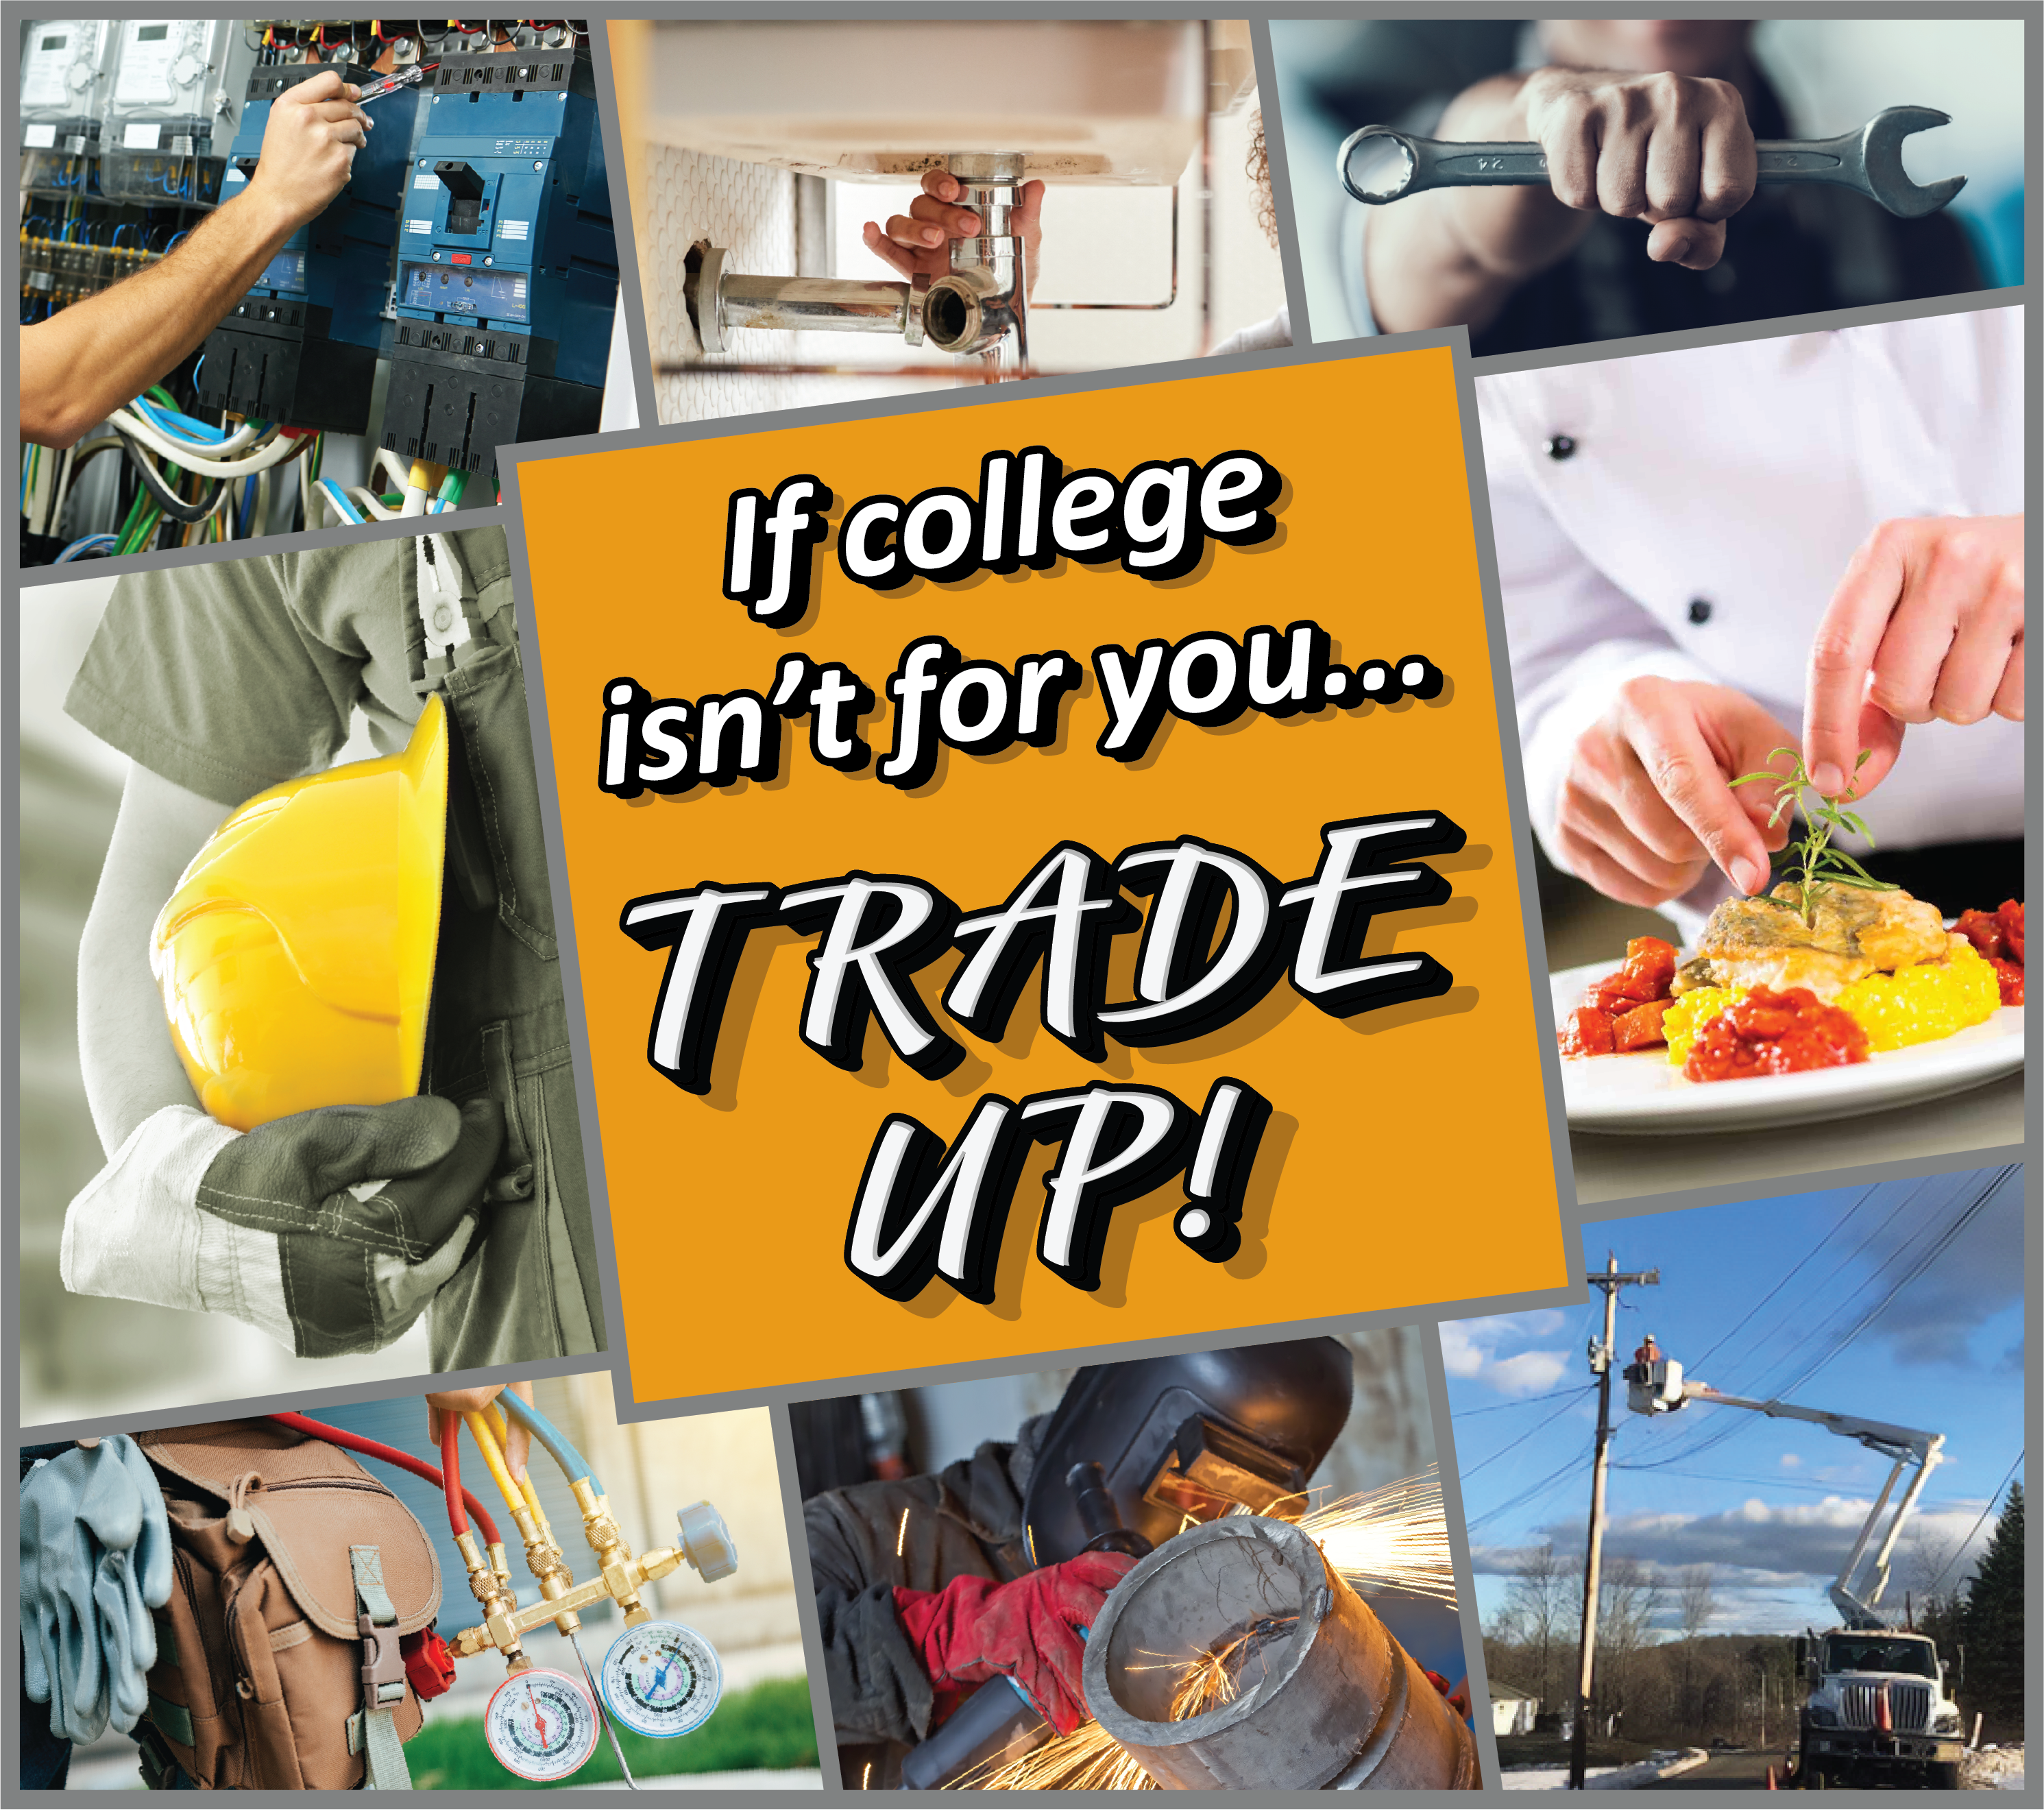 If college isn't for you... TRADE UP!